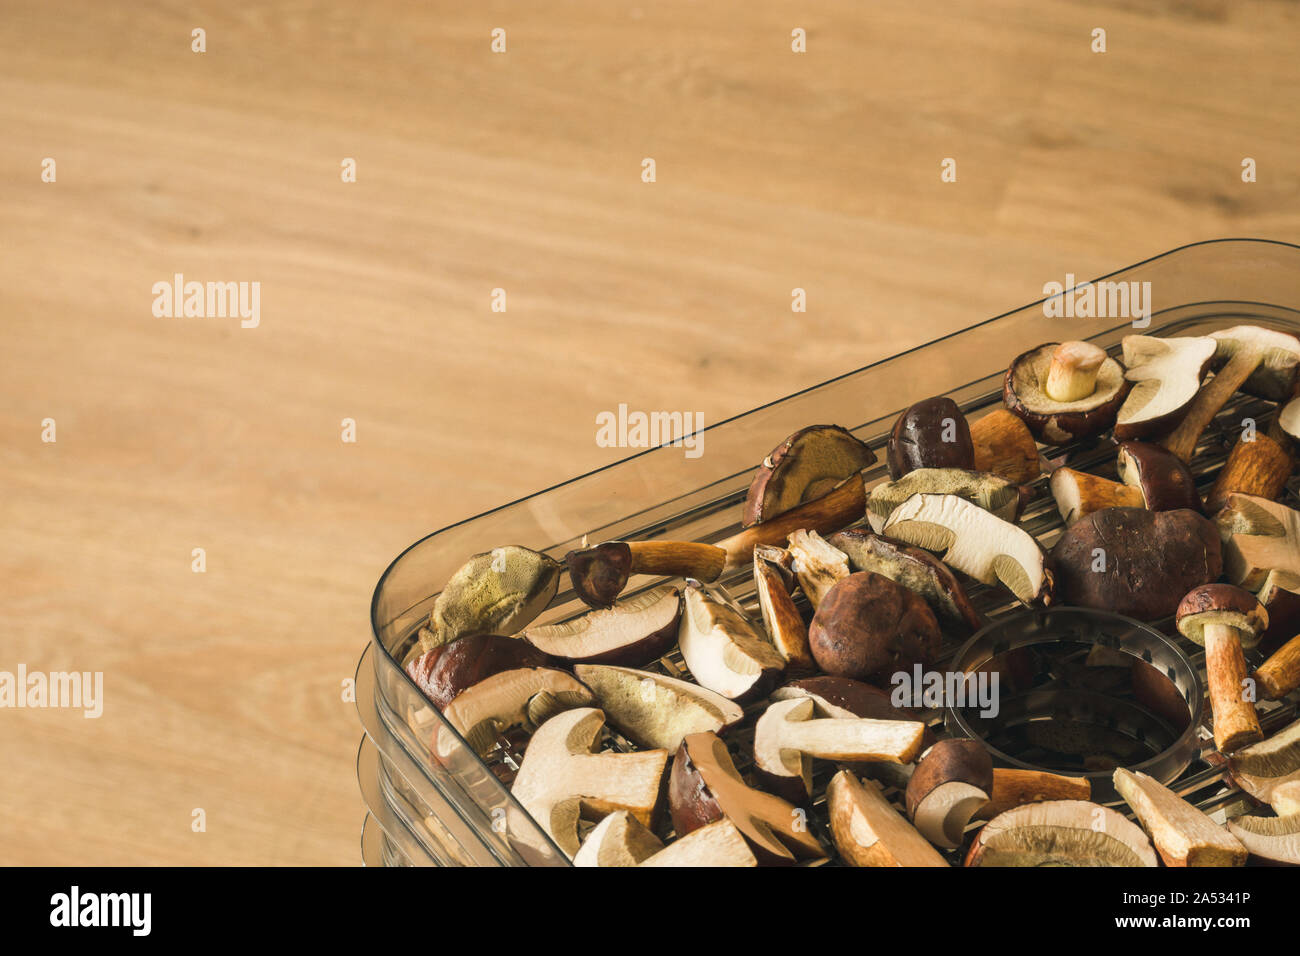 Vegetables dryer on wooden table with wooden background. Preparing for drying mushrooms. Stock Photo